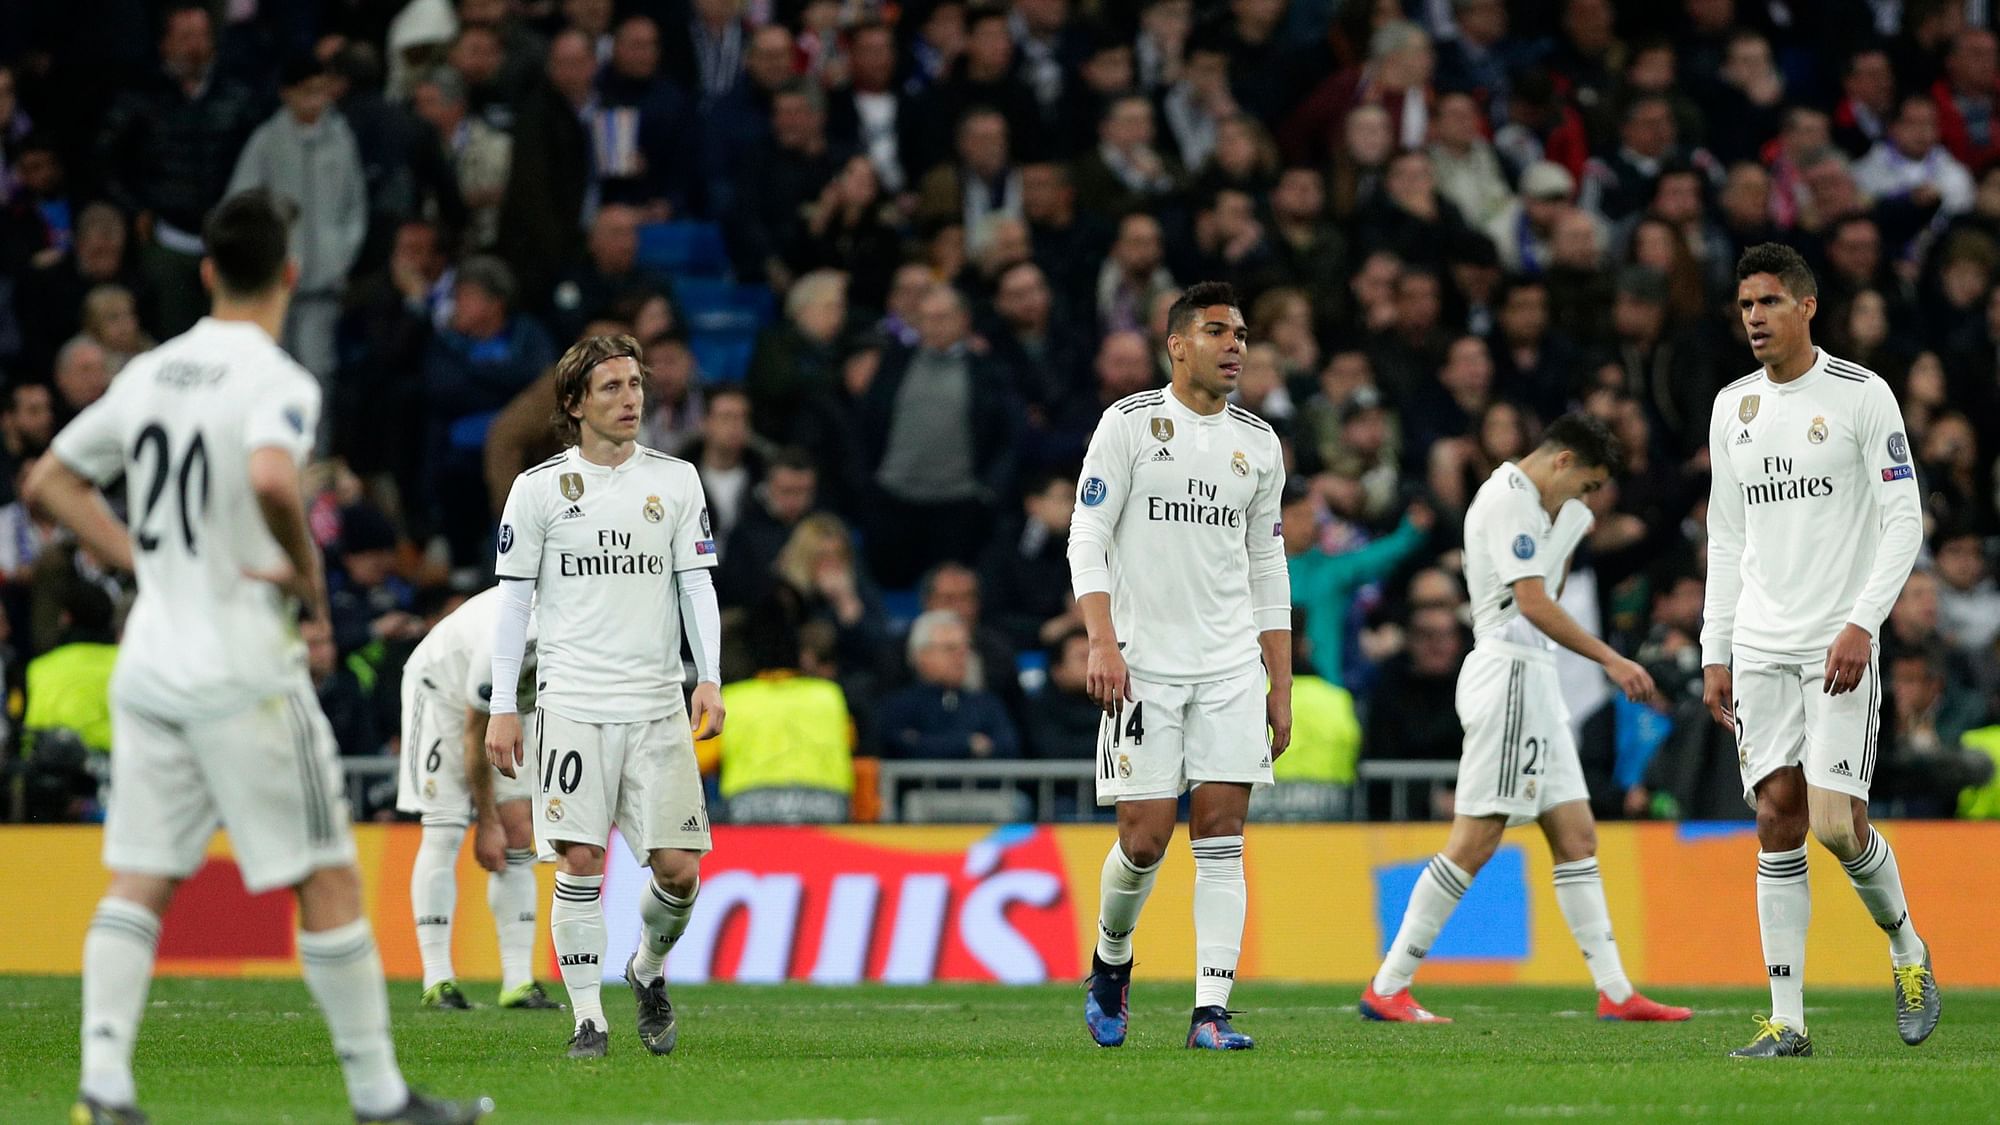 Real Madrid player react as Ajax’s Dusan Tadic celebrates scoring his side’s 3rd goal, during the Champions League soccer match between Real Madrid and Ajax at the Santiago Bernabeu stadium in Madrid, Spain, Tuesday, March 5, 2019.&nbsp;